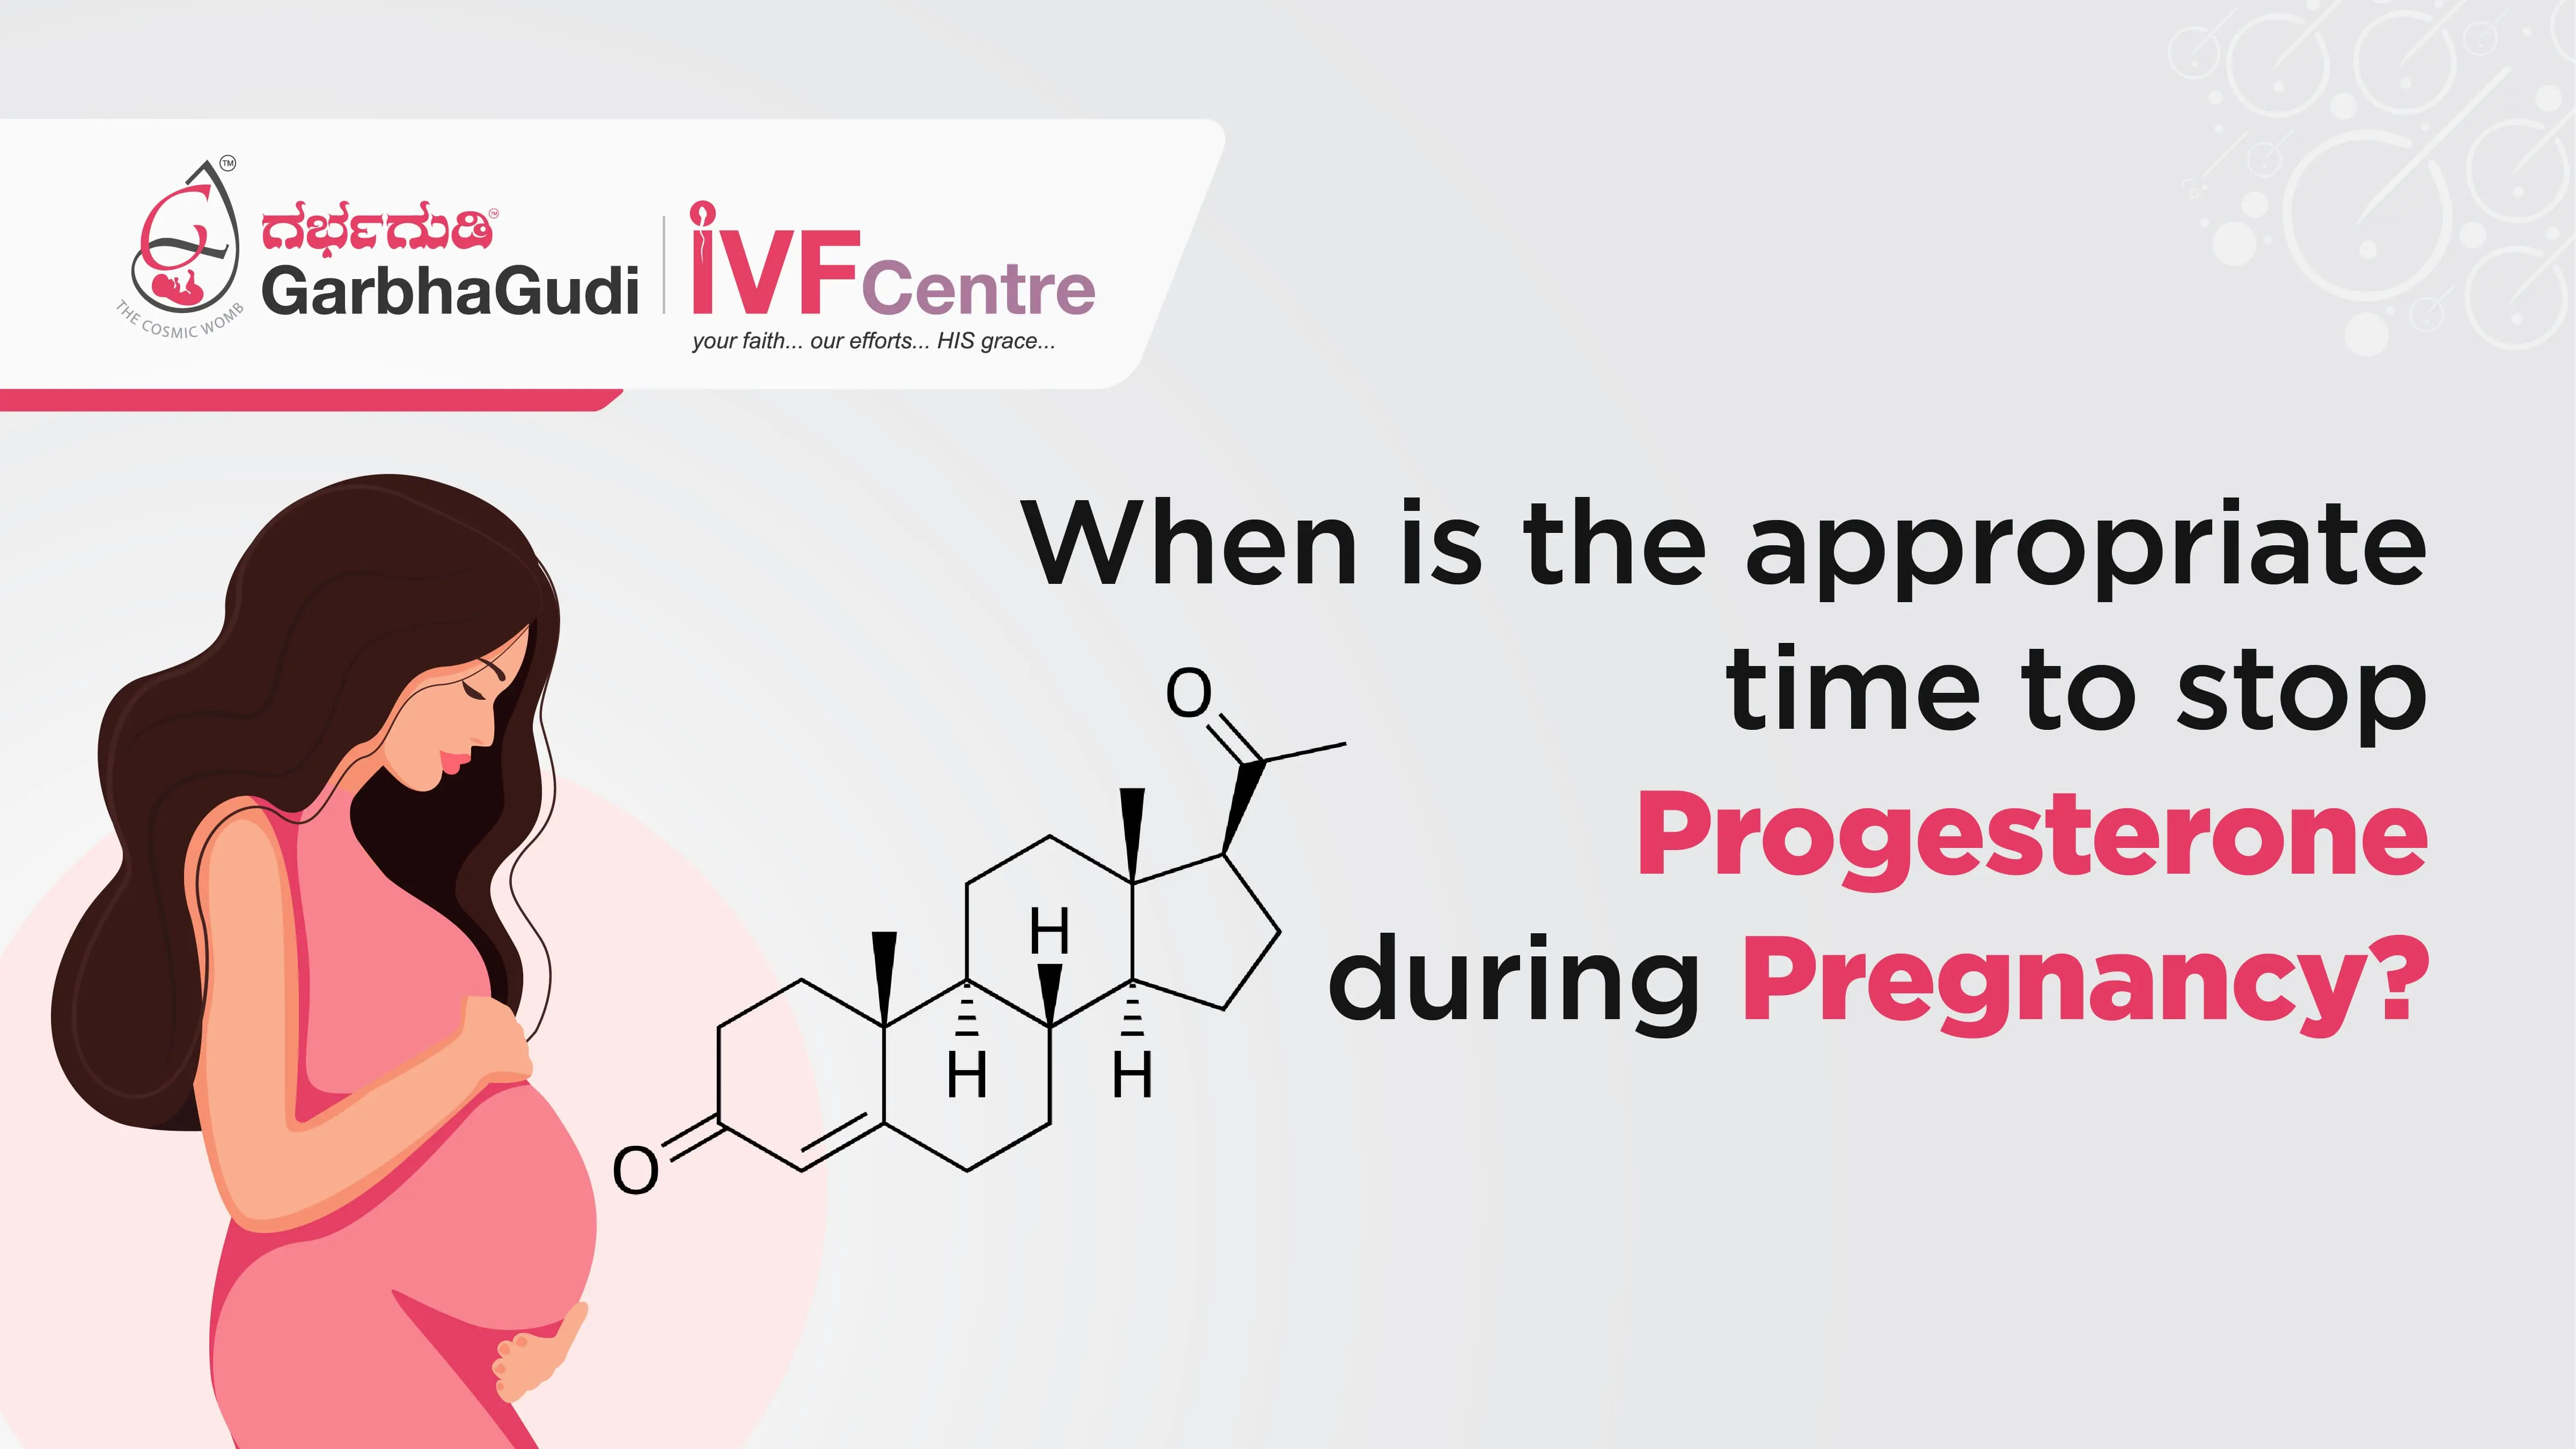 When is the appropriate time to discontinue progesterone during pregnancy?